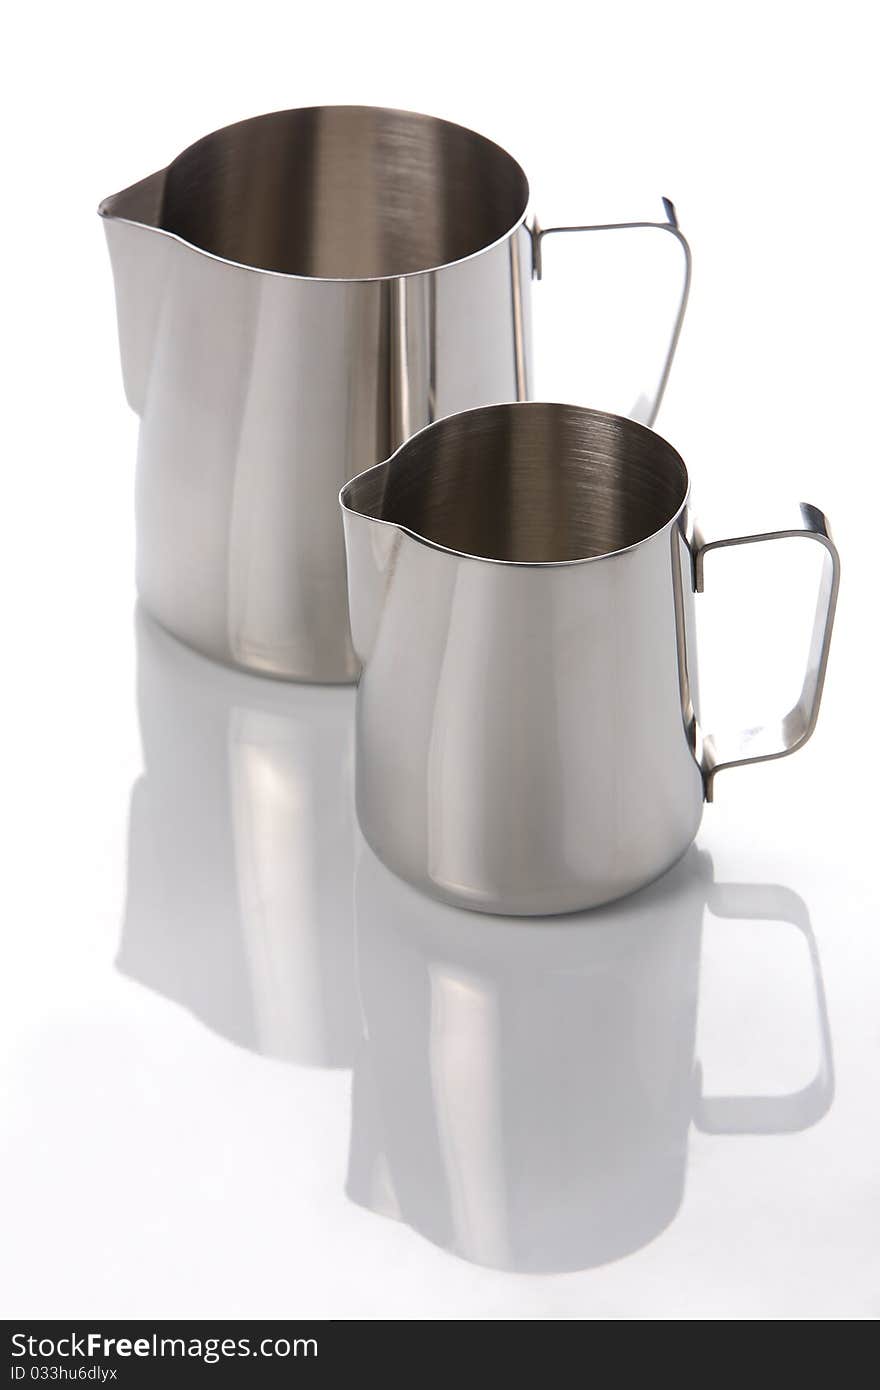 Two metal jugs on a white background